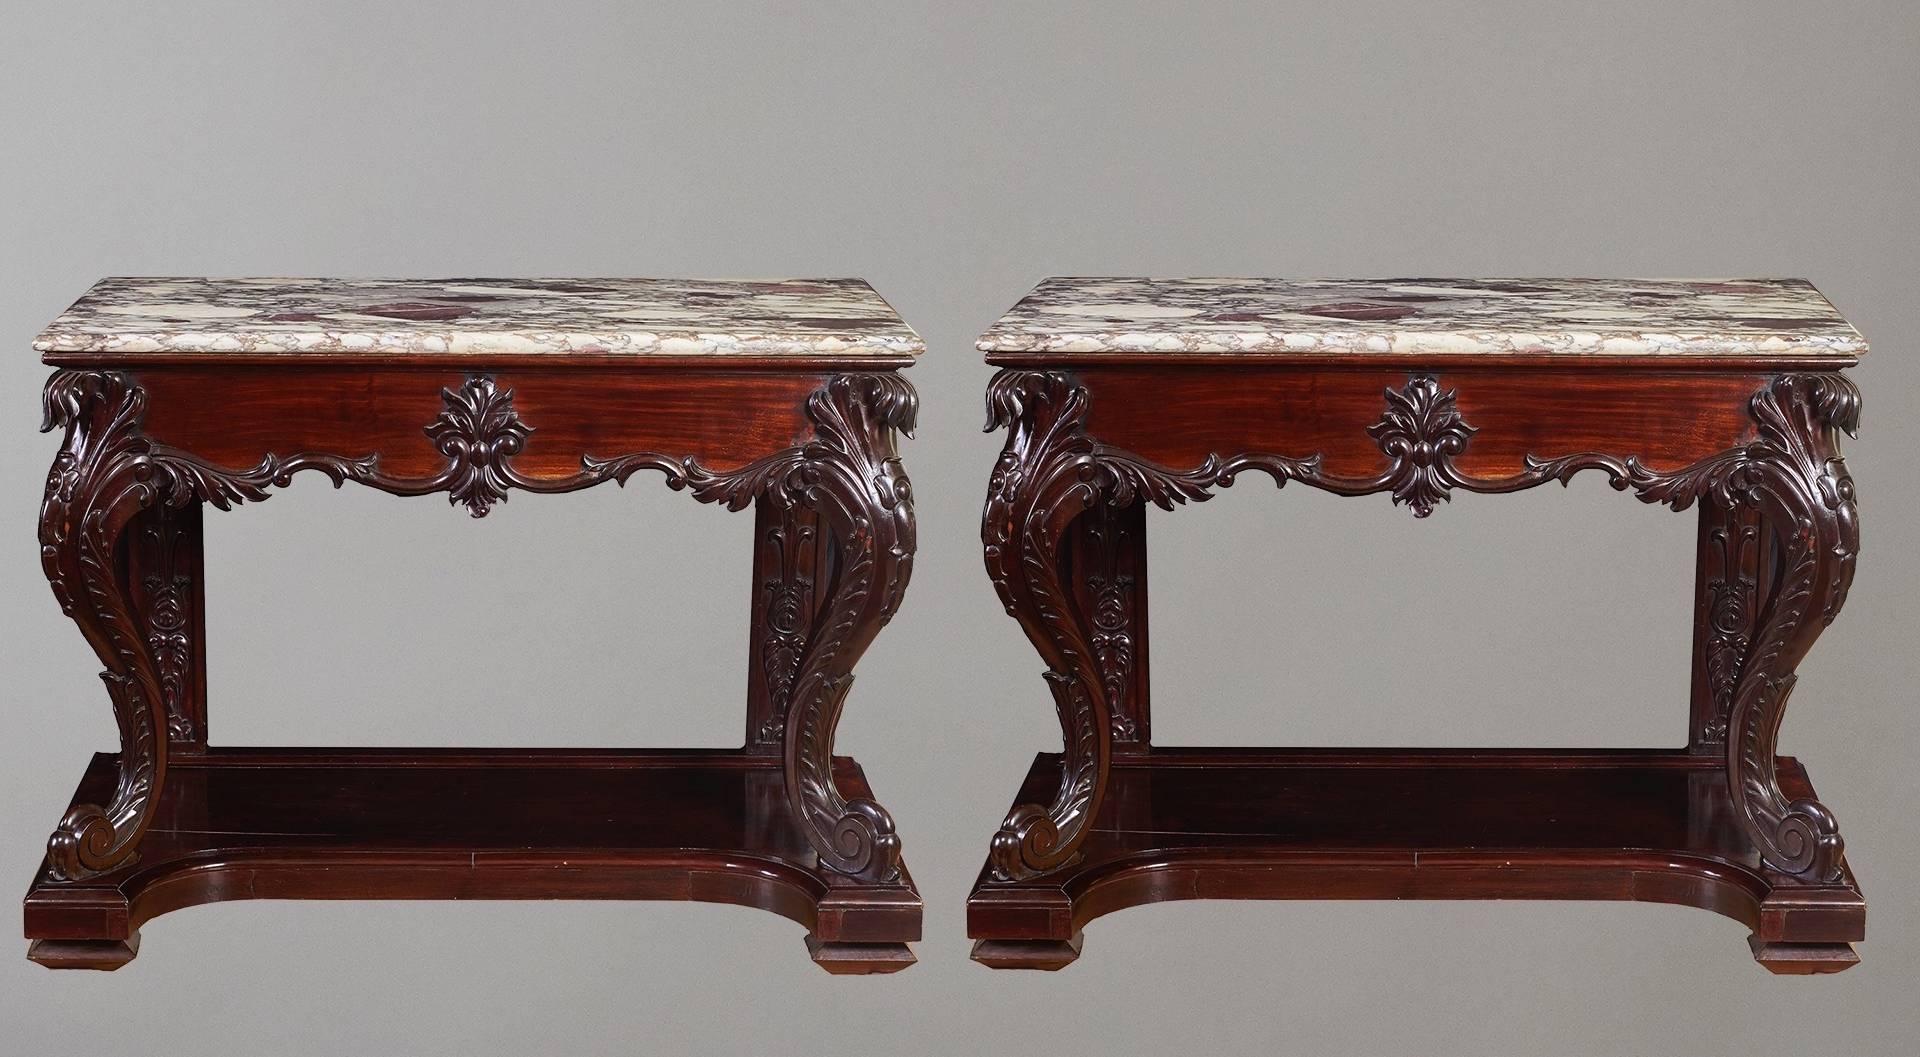 A rare pair of Chinese export hardwood console tables, each with a rectangular marble top above a carved frieze on cabriole supports raised on a platform. (For a similar single table, see Sotheby's 